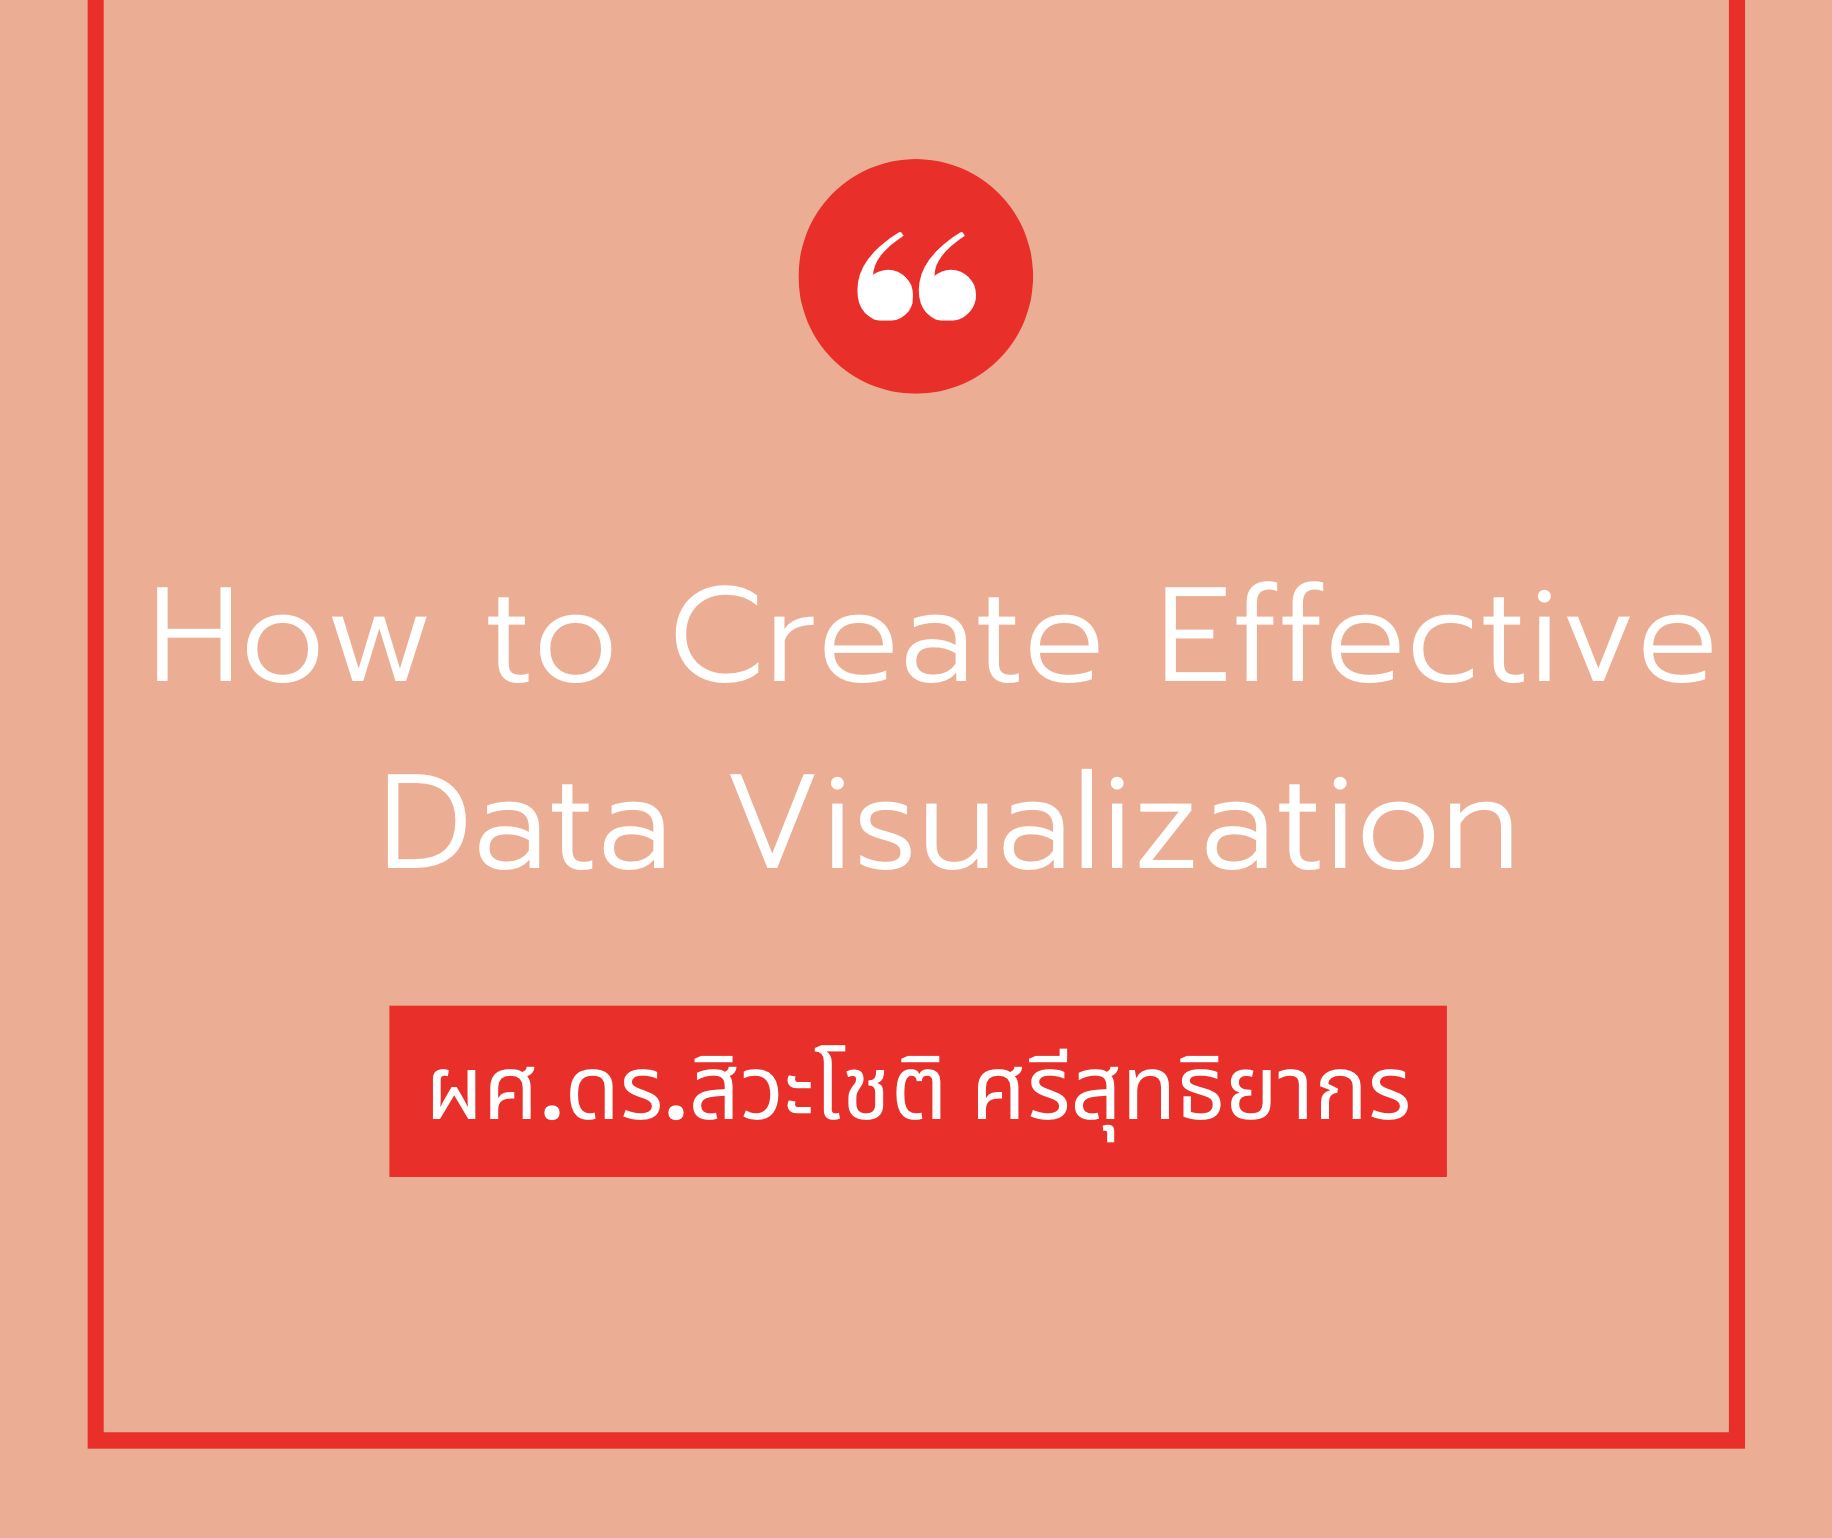 Workshop 2 - How to create Effective Data Visualizations